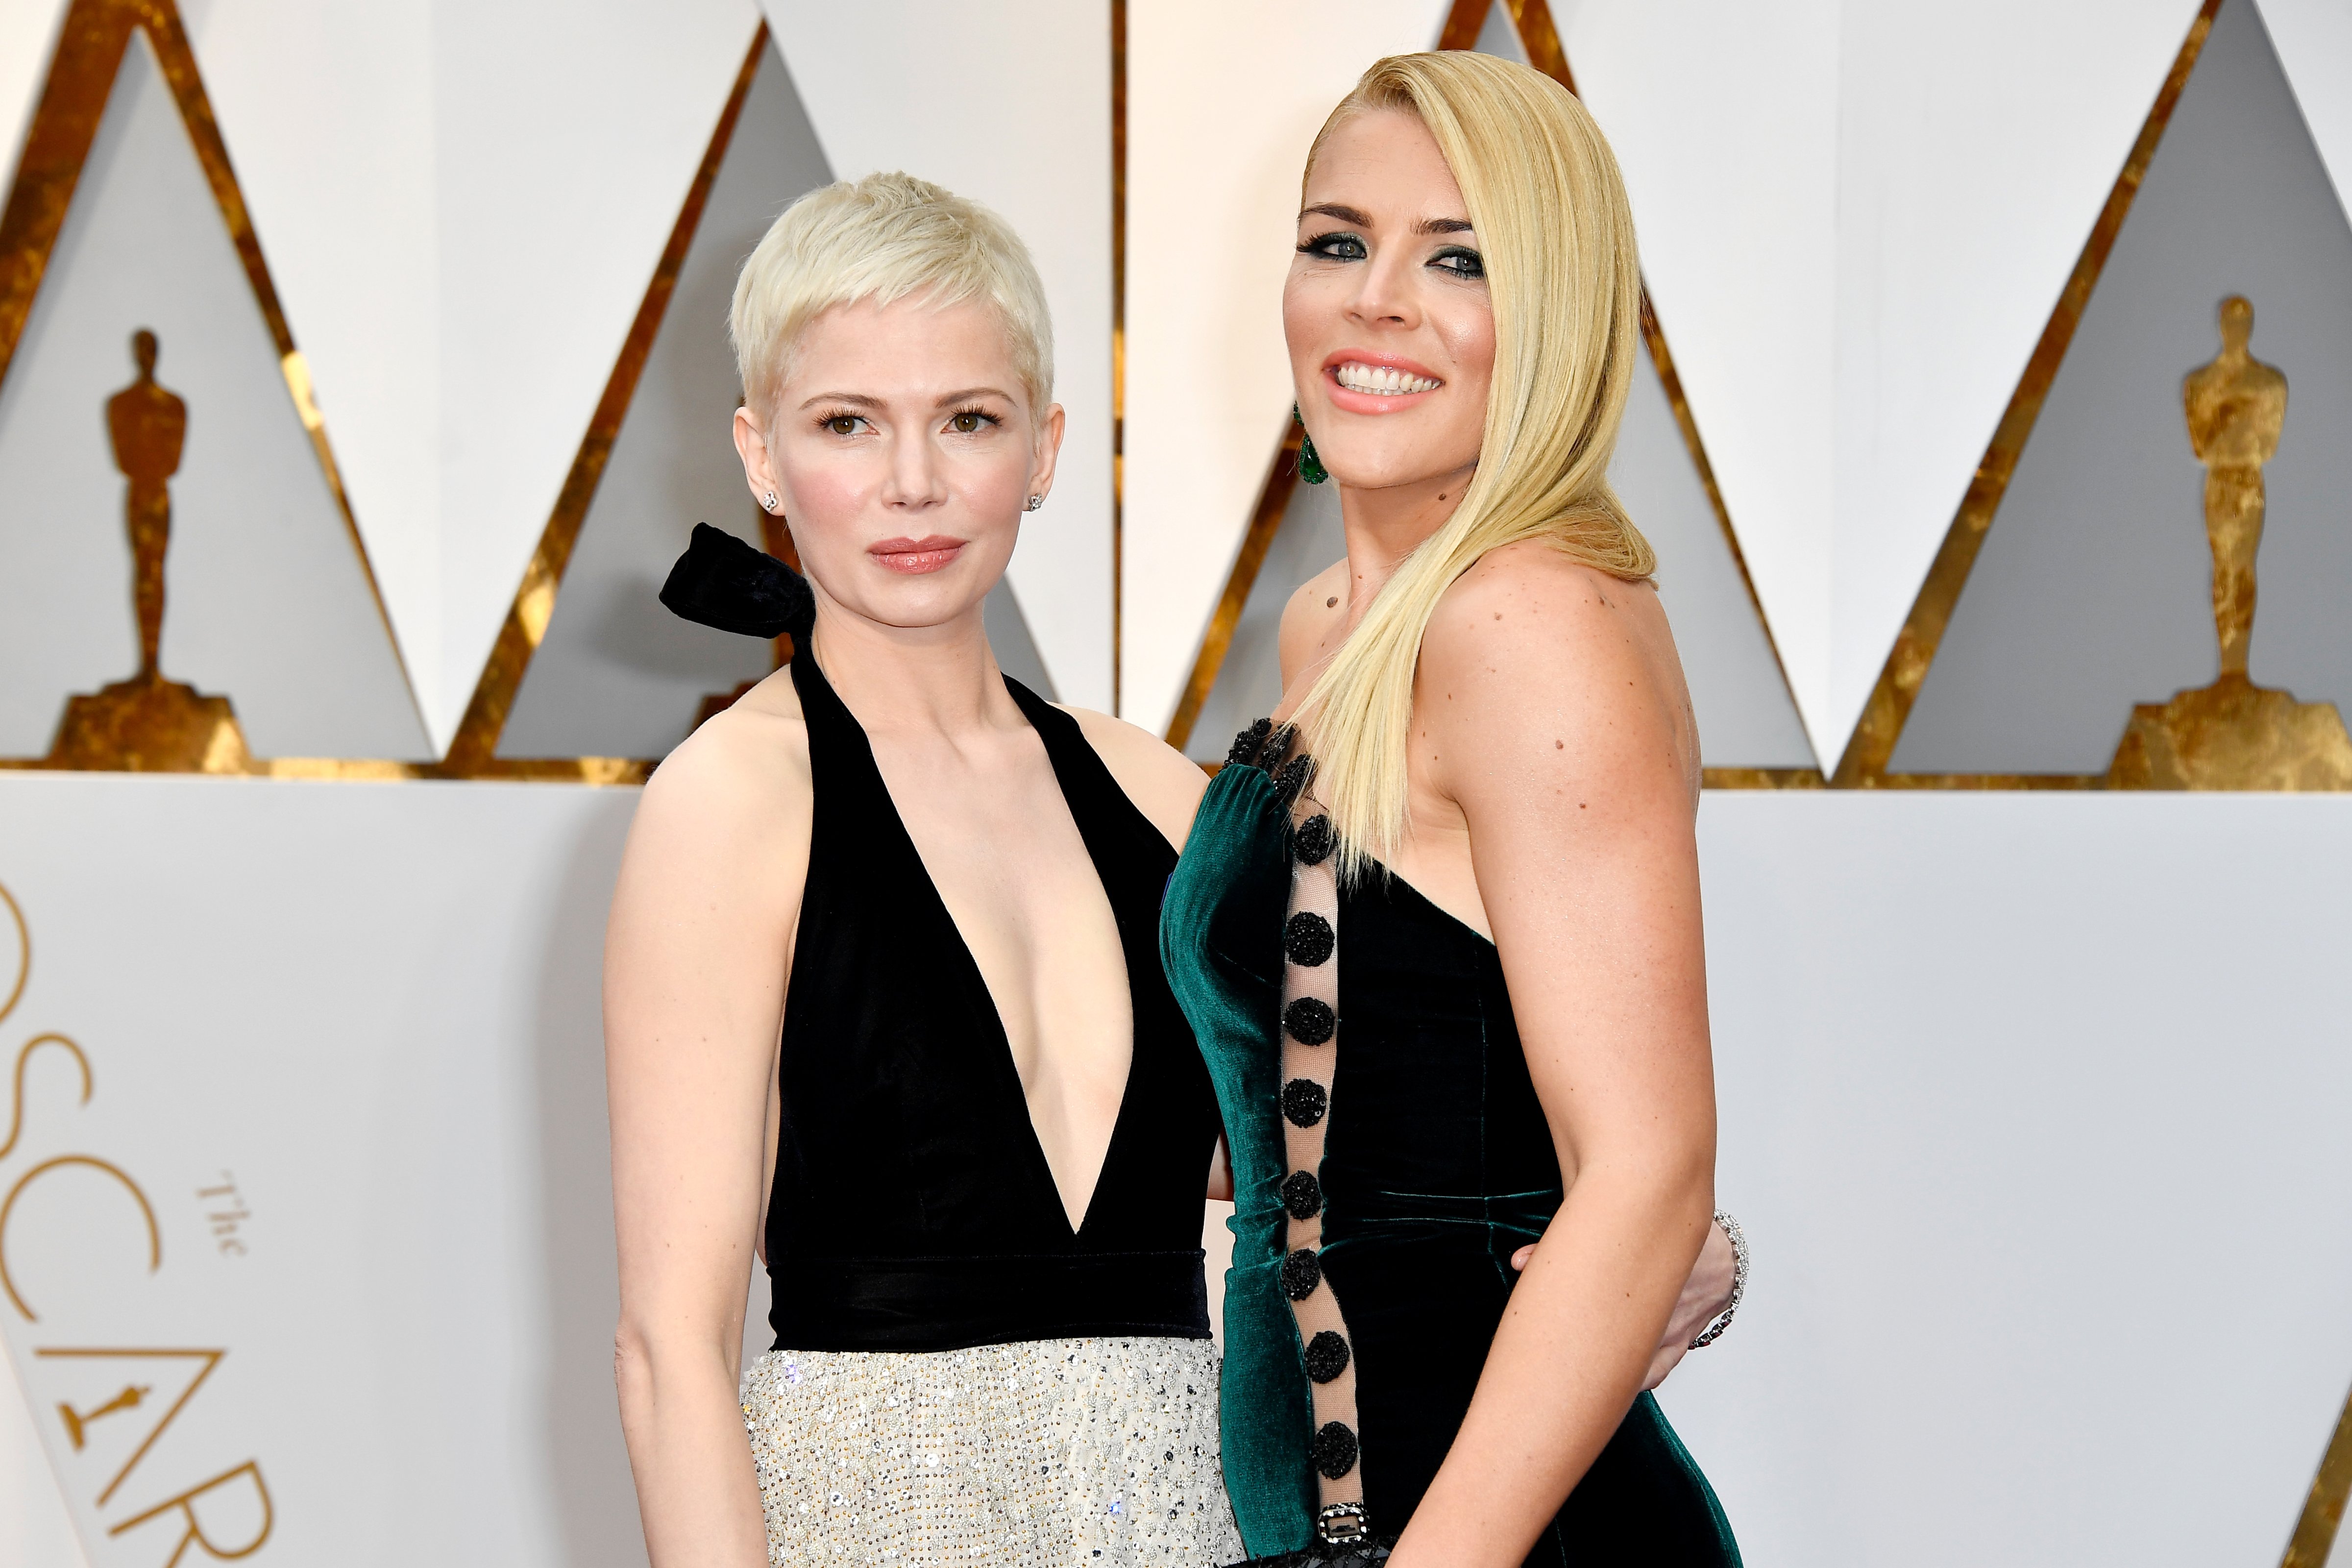 HOLLYWOOD, CA - FEBRUARY 26:  Actors Michelle Williams (L) and Busy Philipps attend the 89th Annual Academy Awards at Hollywood & Highland Center on February 26, 2017 in Hollywood, California.  (Photo by Frazer Harrison/Getty Images) (Frazer Harrison—Getty Images)